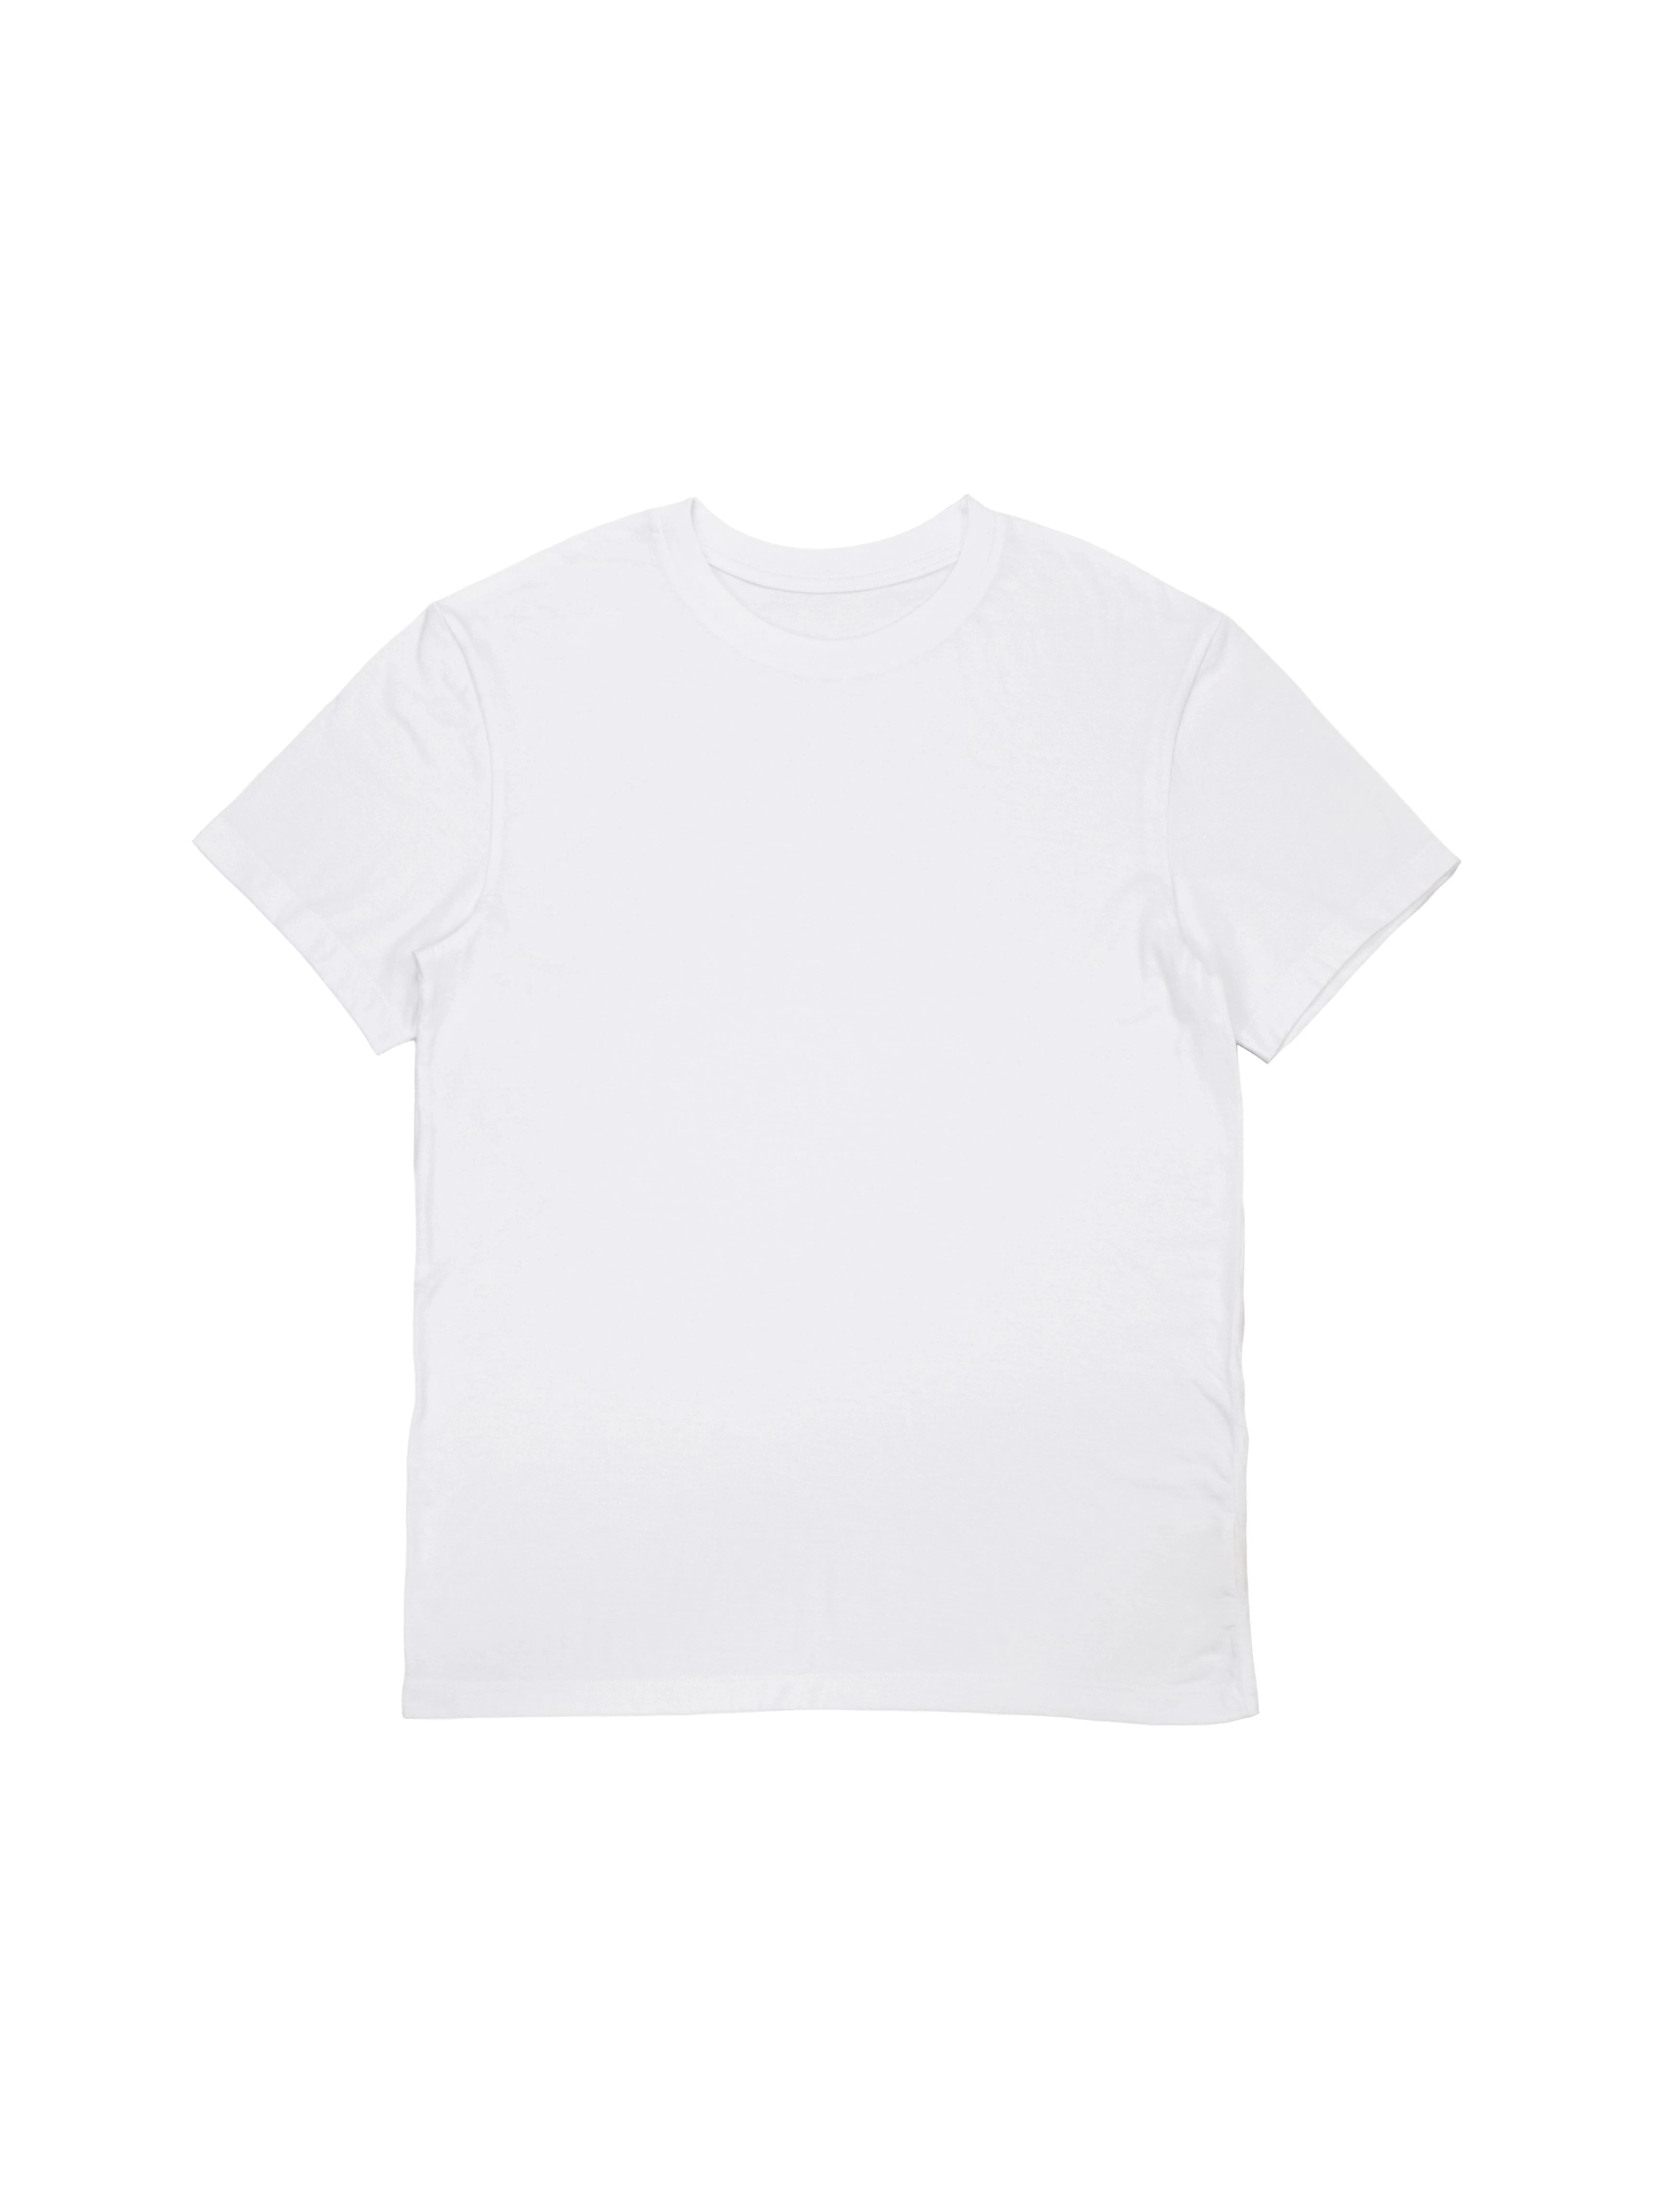 BOXY Fit White T-Shirt Essential - 100% Organic Cotton Made In Canada ...